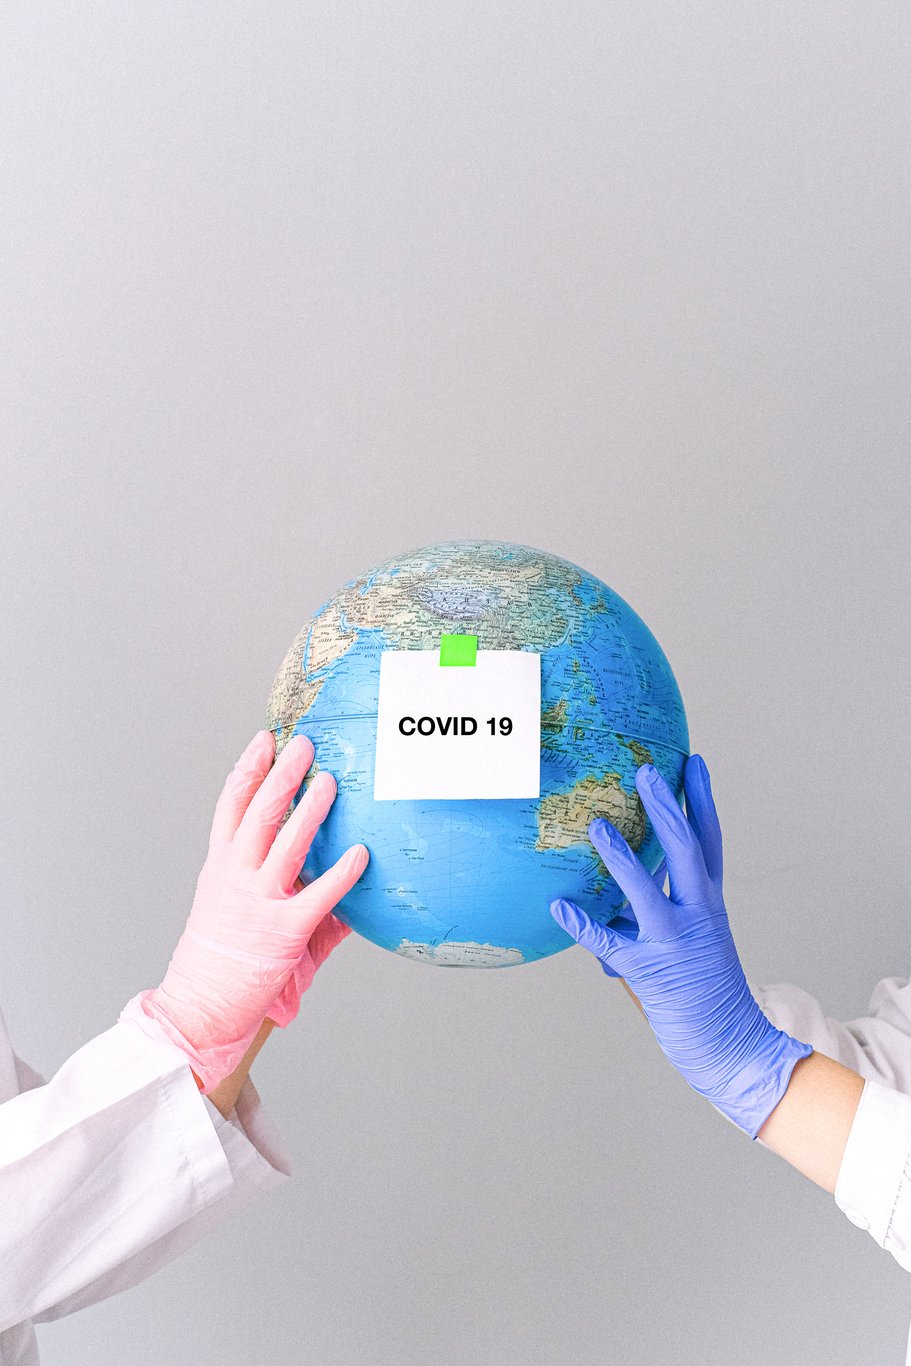 hands-with-latex-gloves-holding-a-globe-4167559